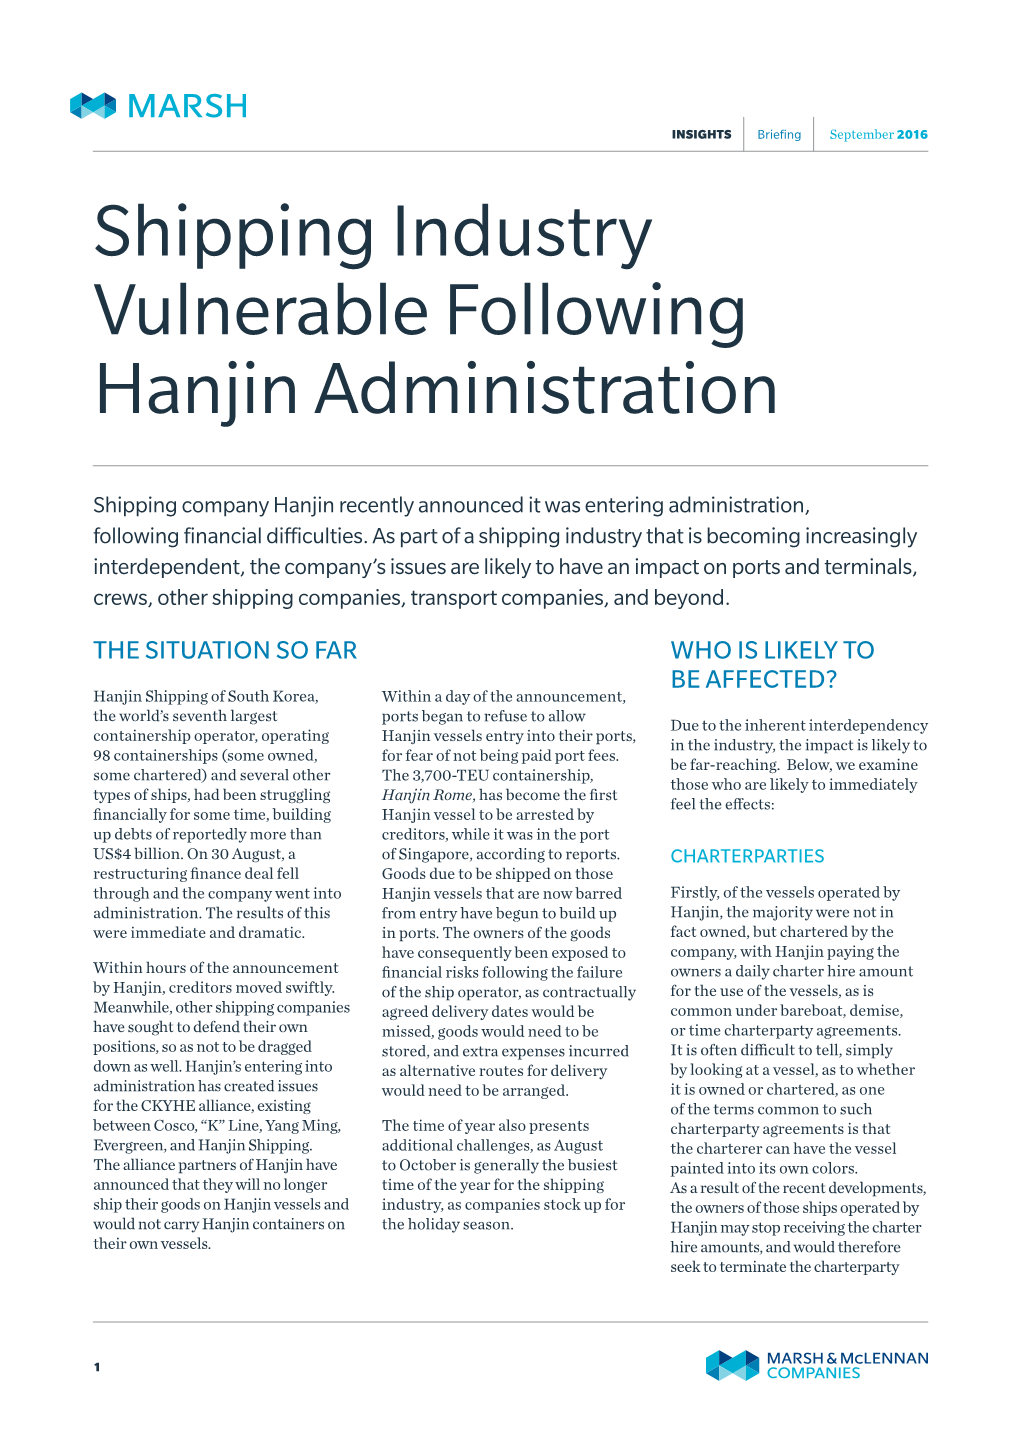 Shipping Industry Vulnerable Following Hanjin Administration